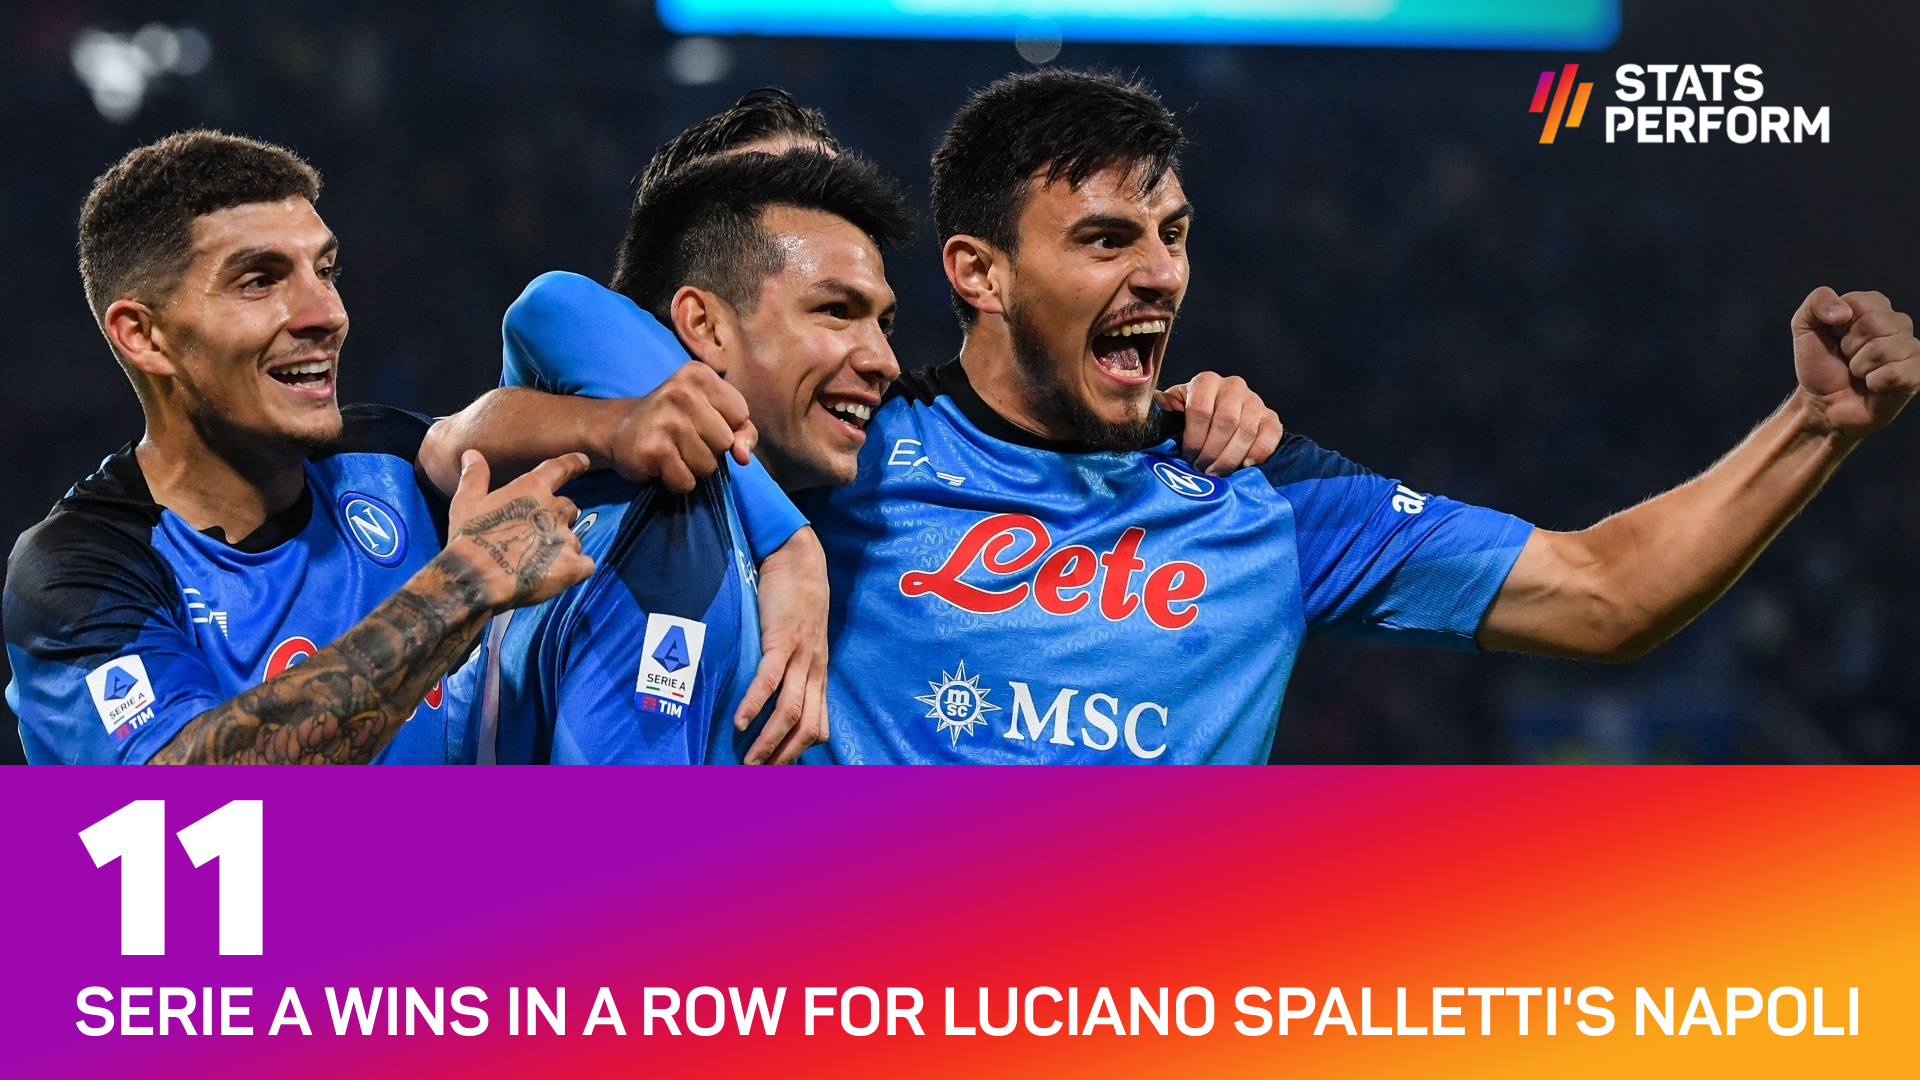 Napoli have won 11 Serie A games in a row